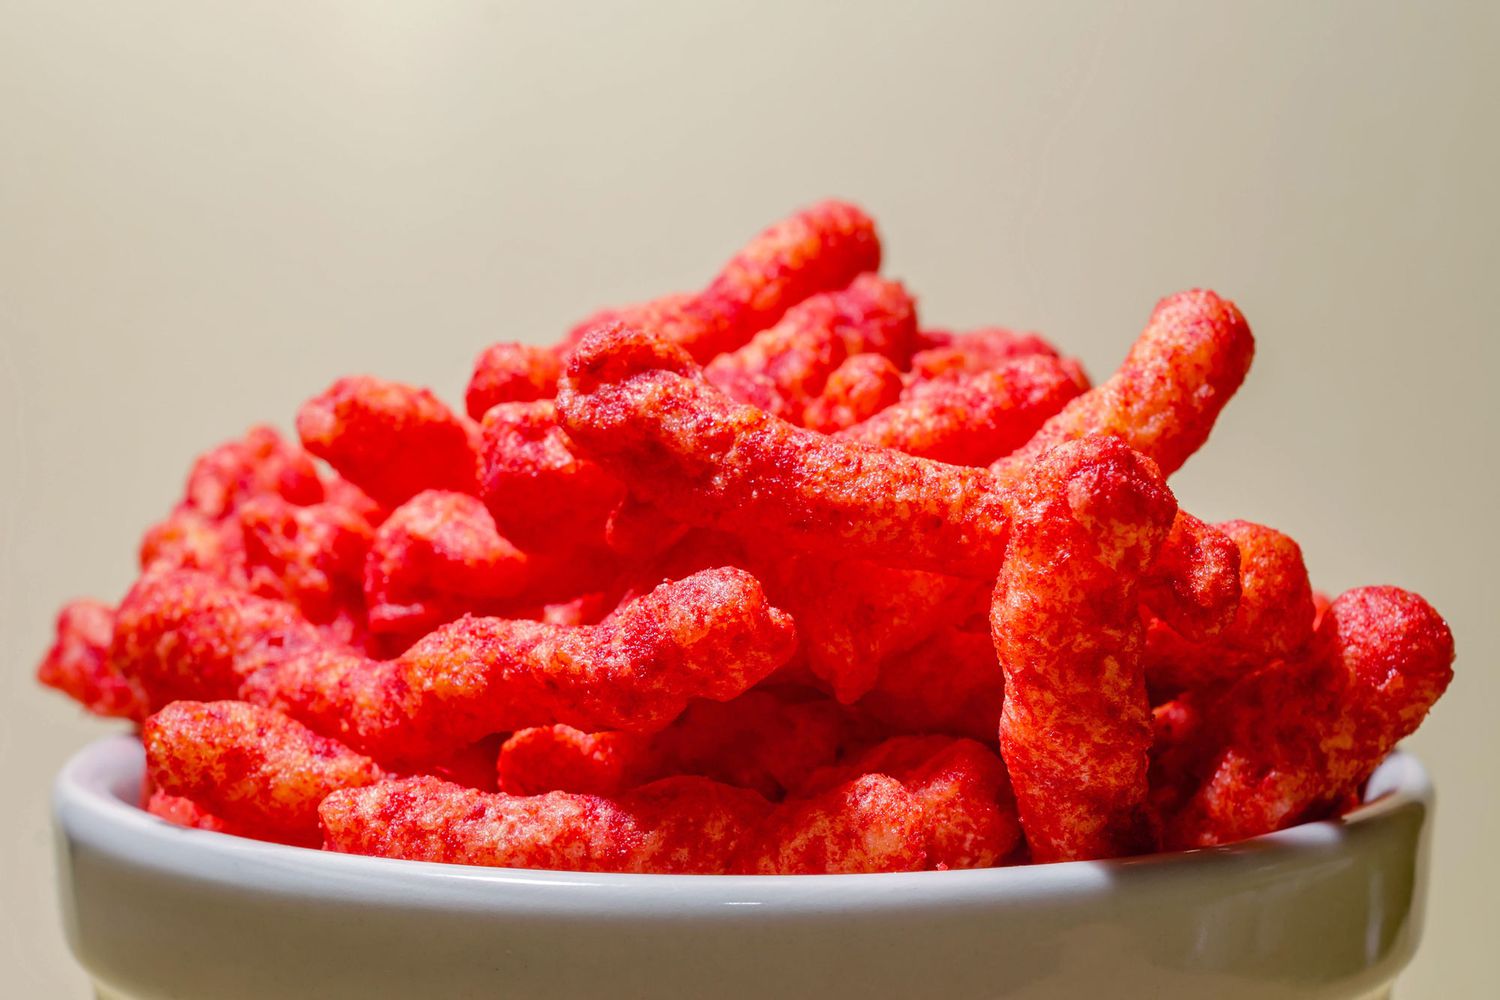 Dogs Go Crazy For Hot Cheetos! Find Out If It’s Safe For Them To Eat.